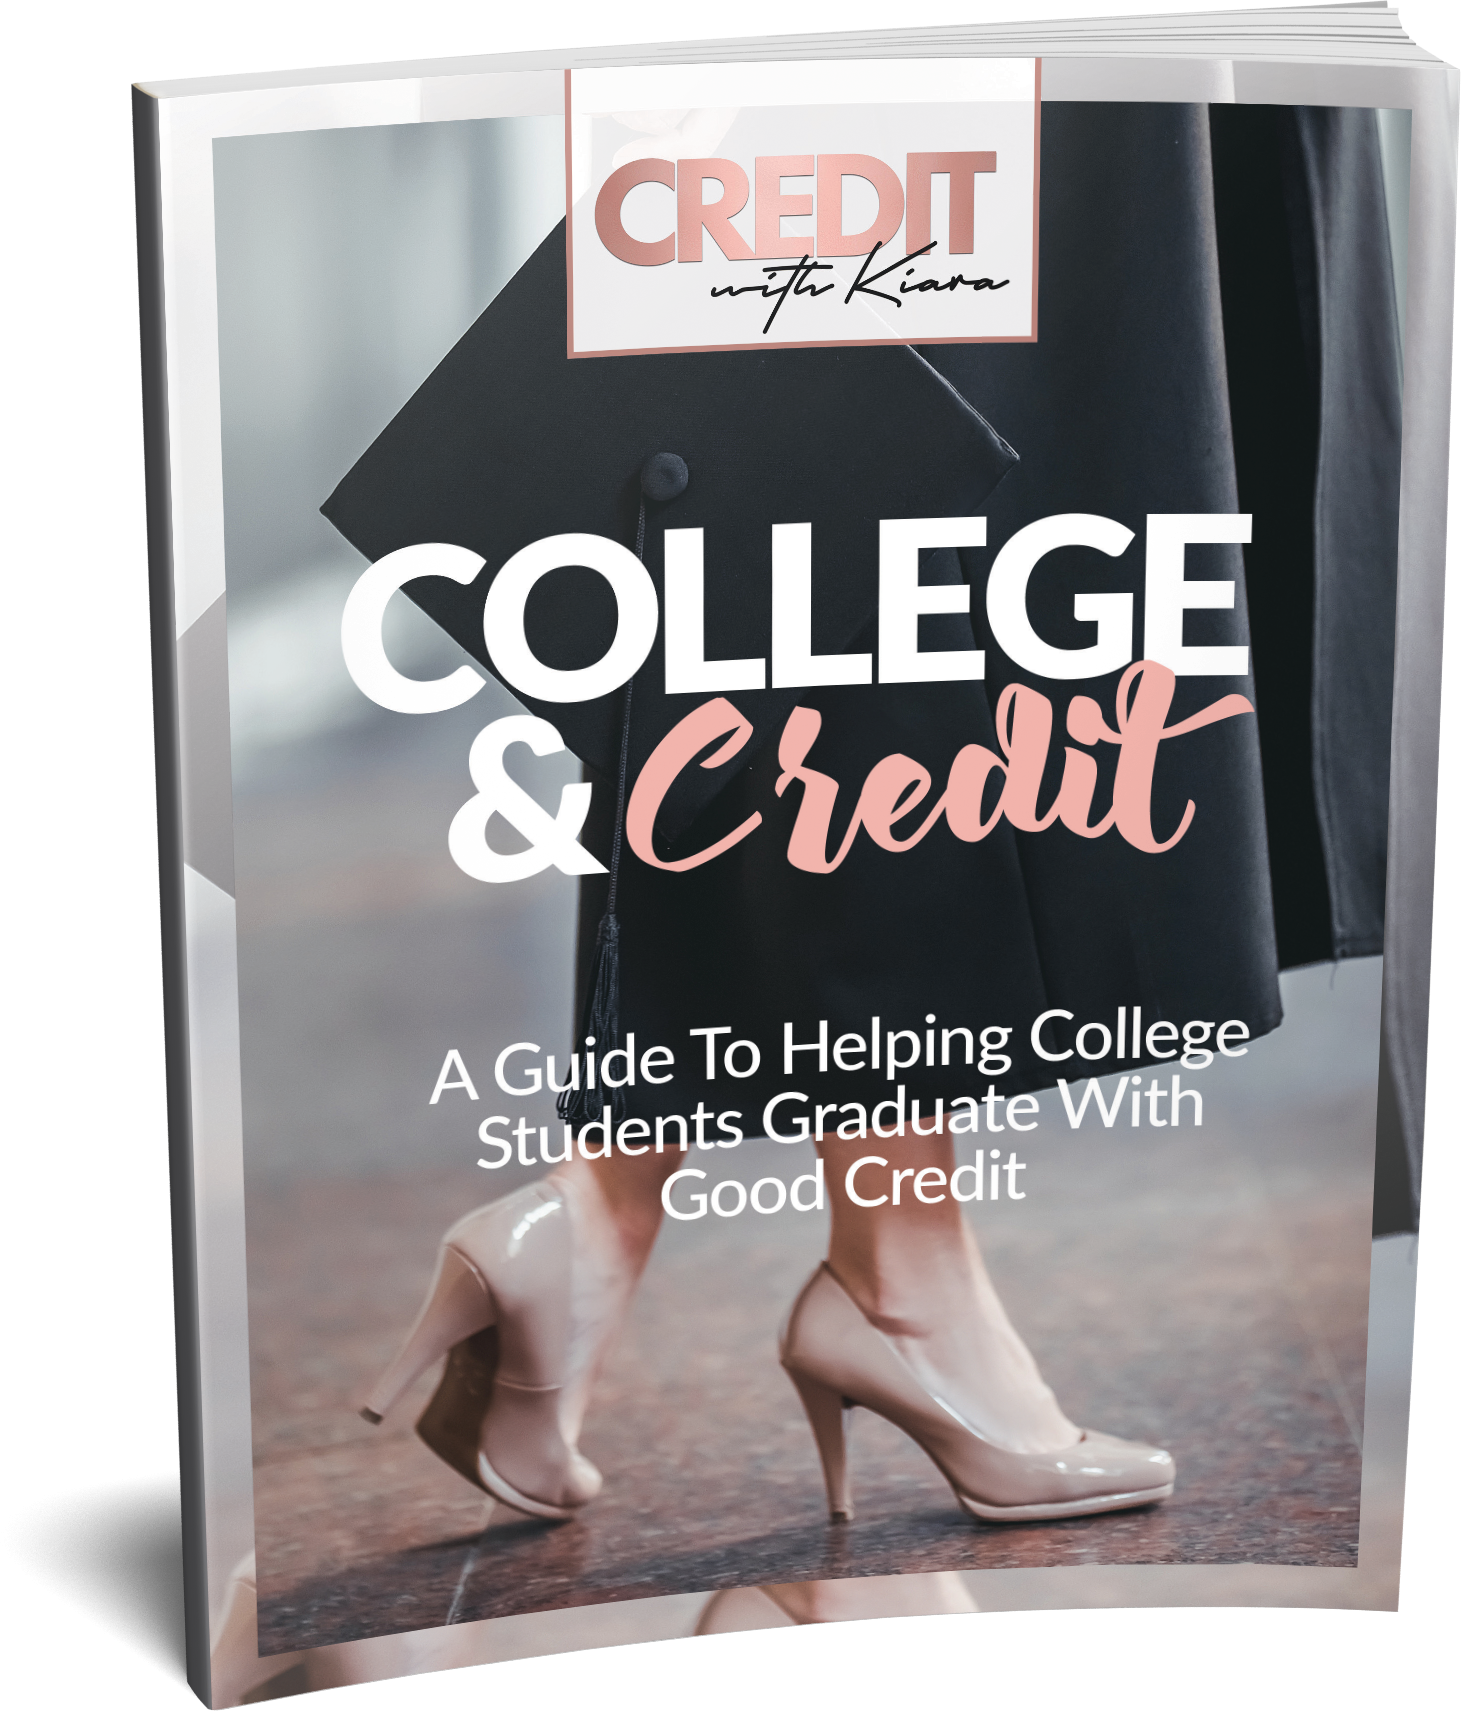 College and Credit: A Guide To Helping College Students Graduate With Good Credit - Credit With Kiara